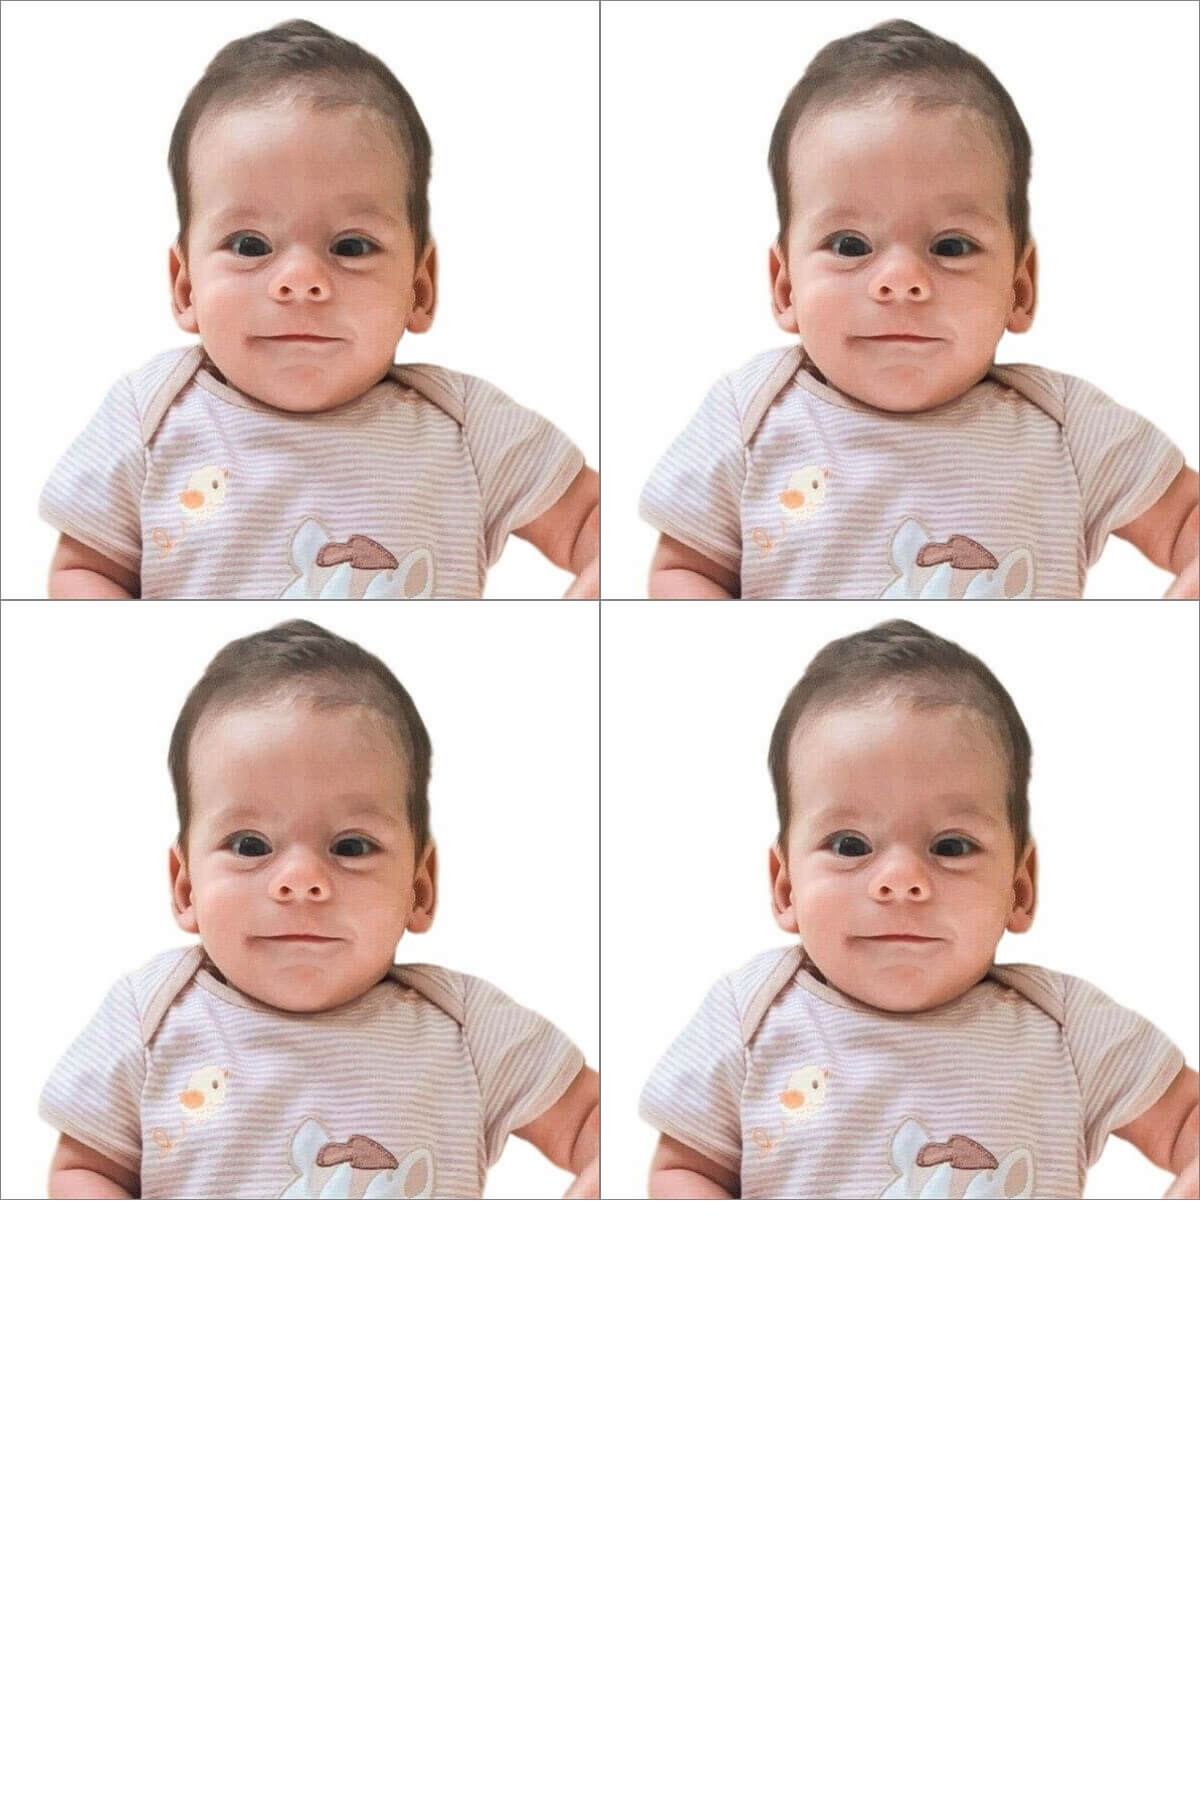 Baby's photos for USA citizenship suitable for printing